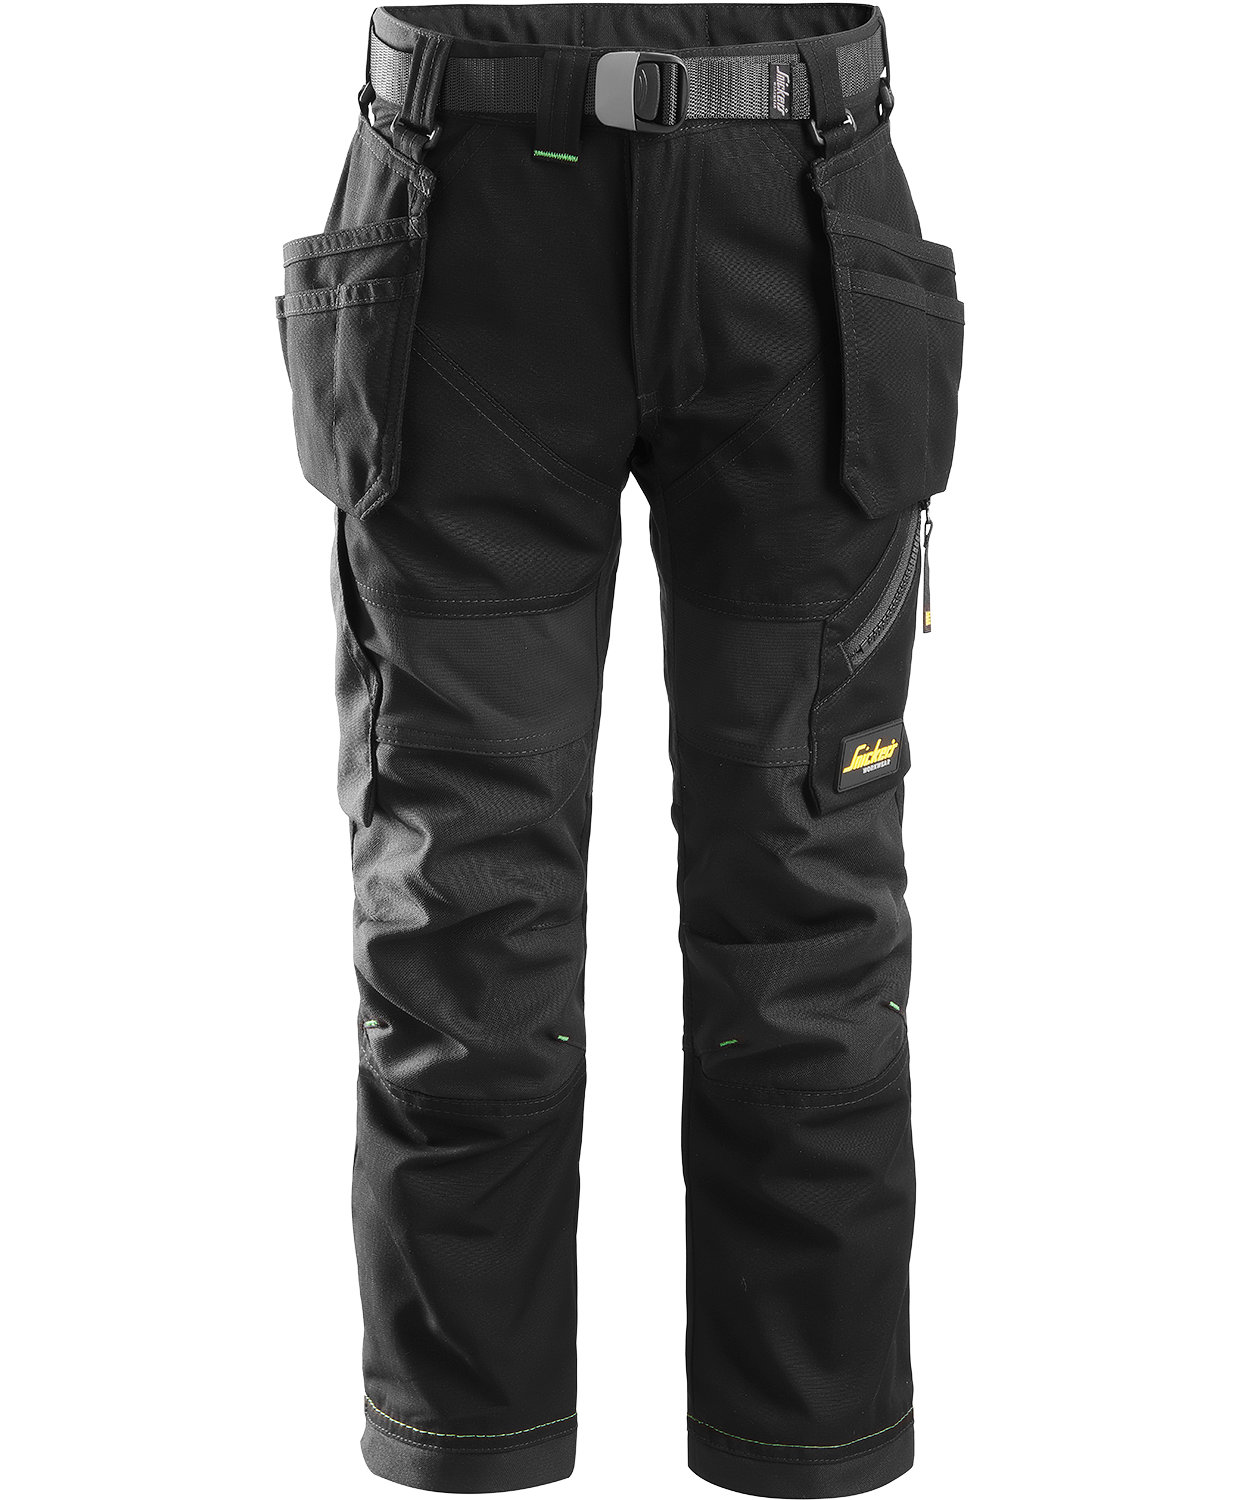 Snickers 6386 ProtecWork Arc Protection Work Trousers – workweargurus.com